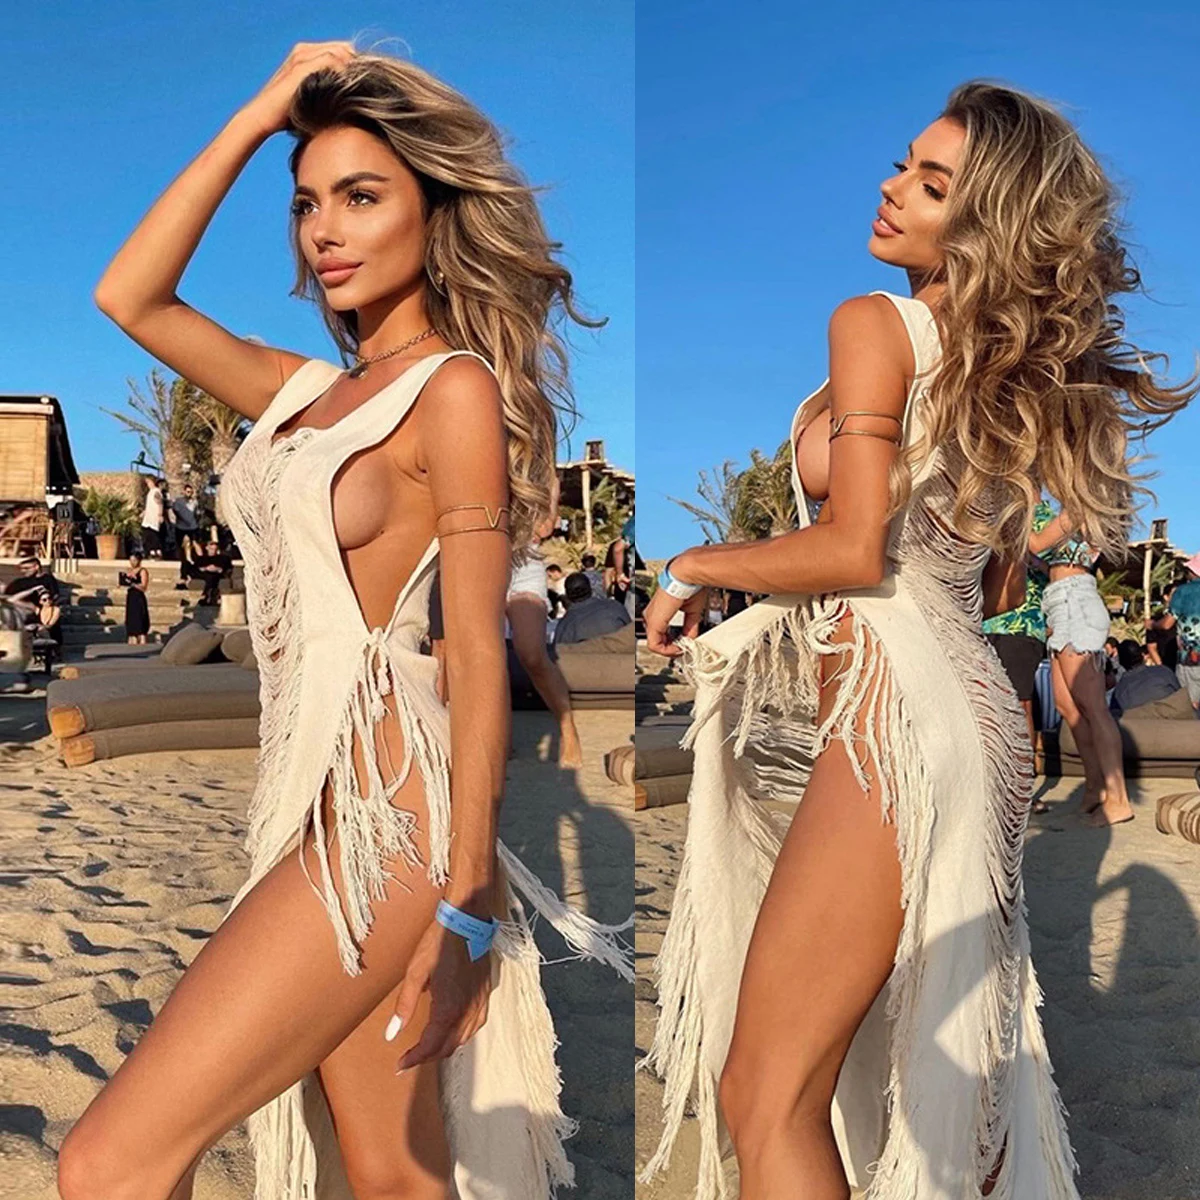 

JS6530 summer 2022 hollow out white straps knitted tassel cover ups maxi beach dresses women sexy boho crochet fringed dress, As shown